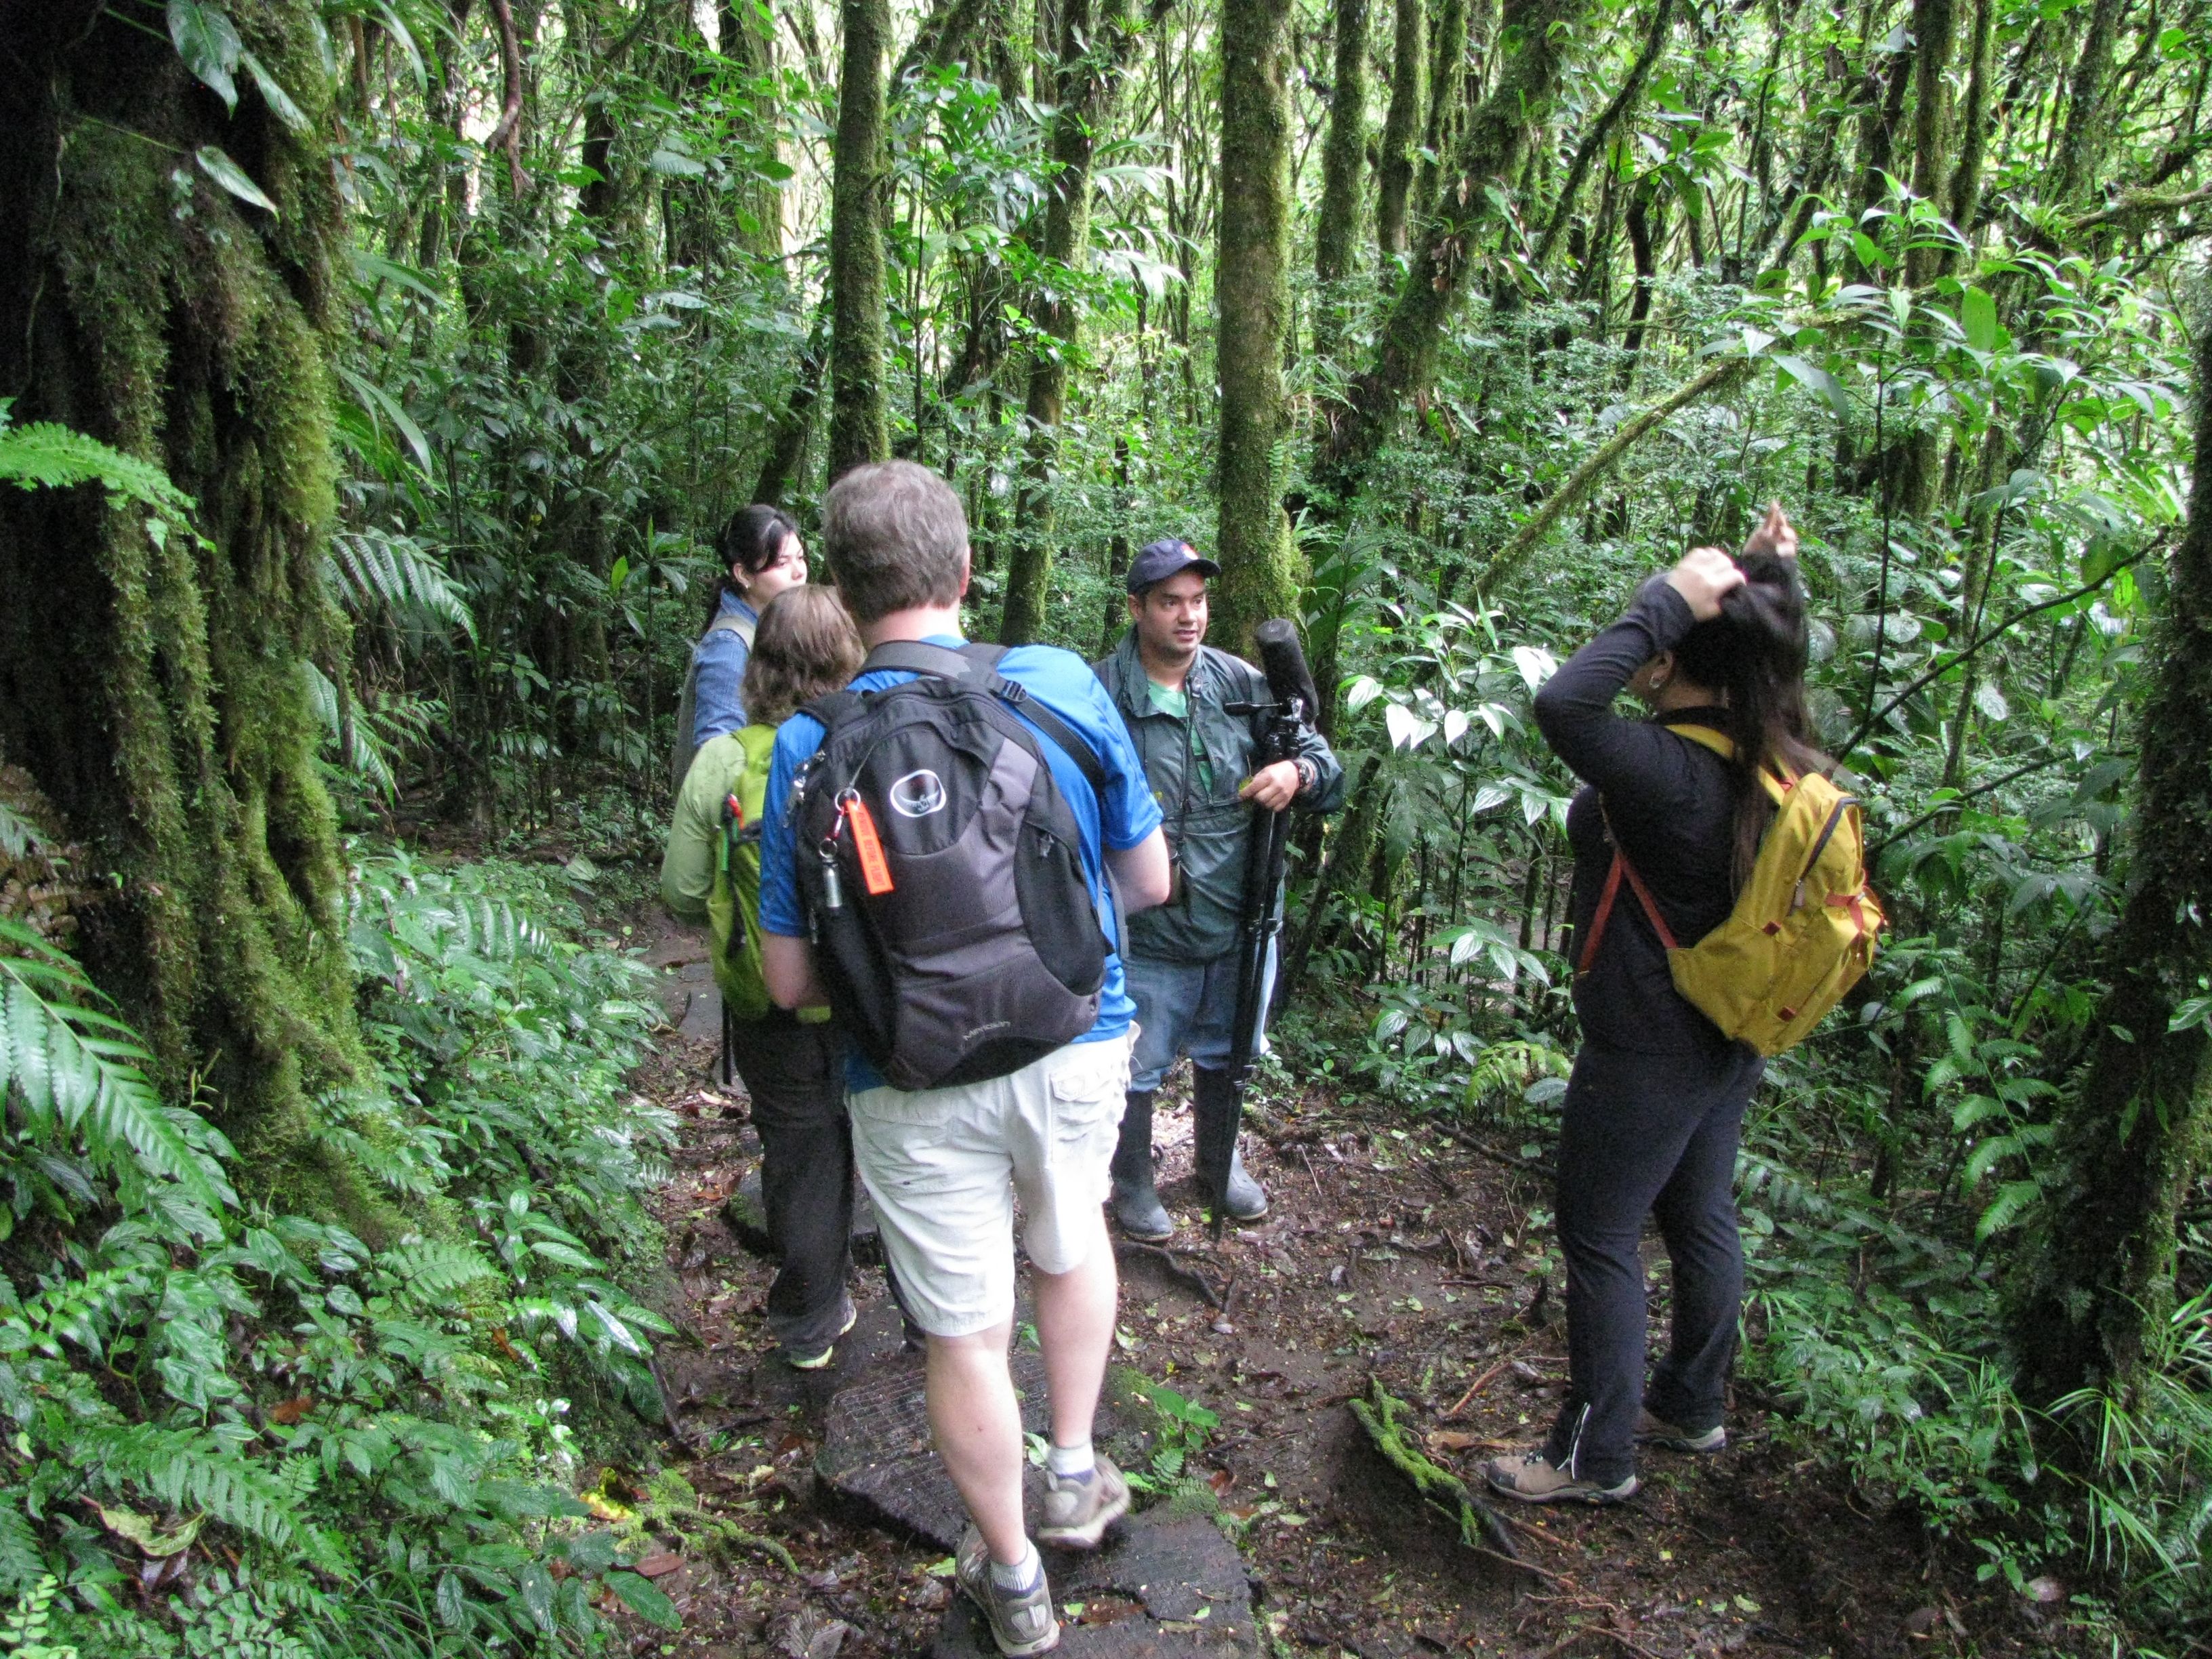 A tour guide talking to tourists in a forest.